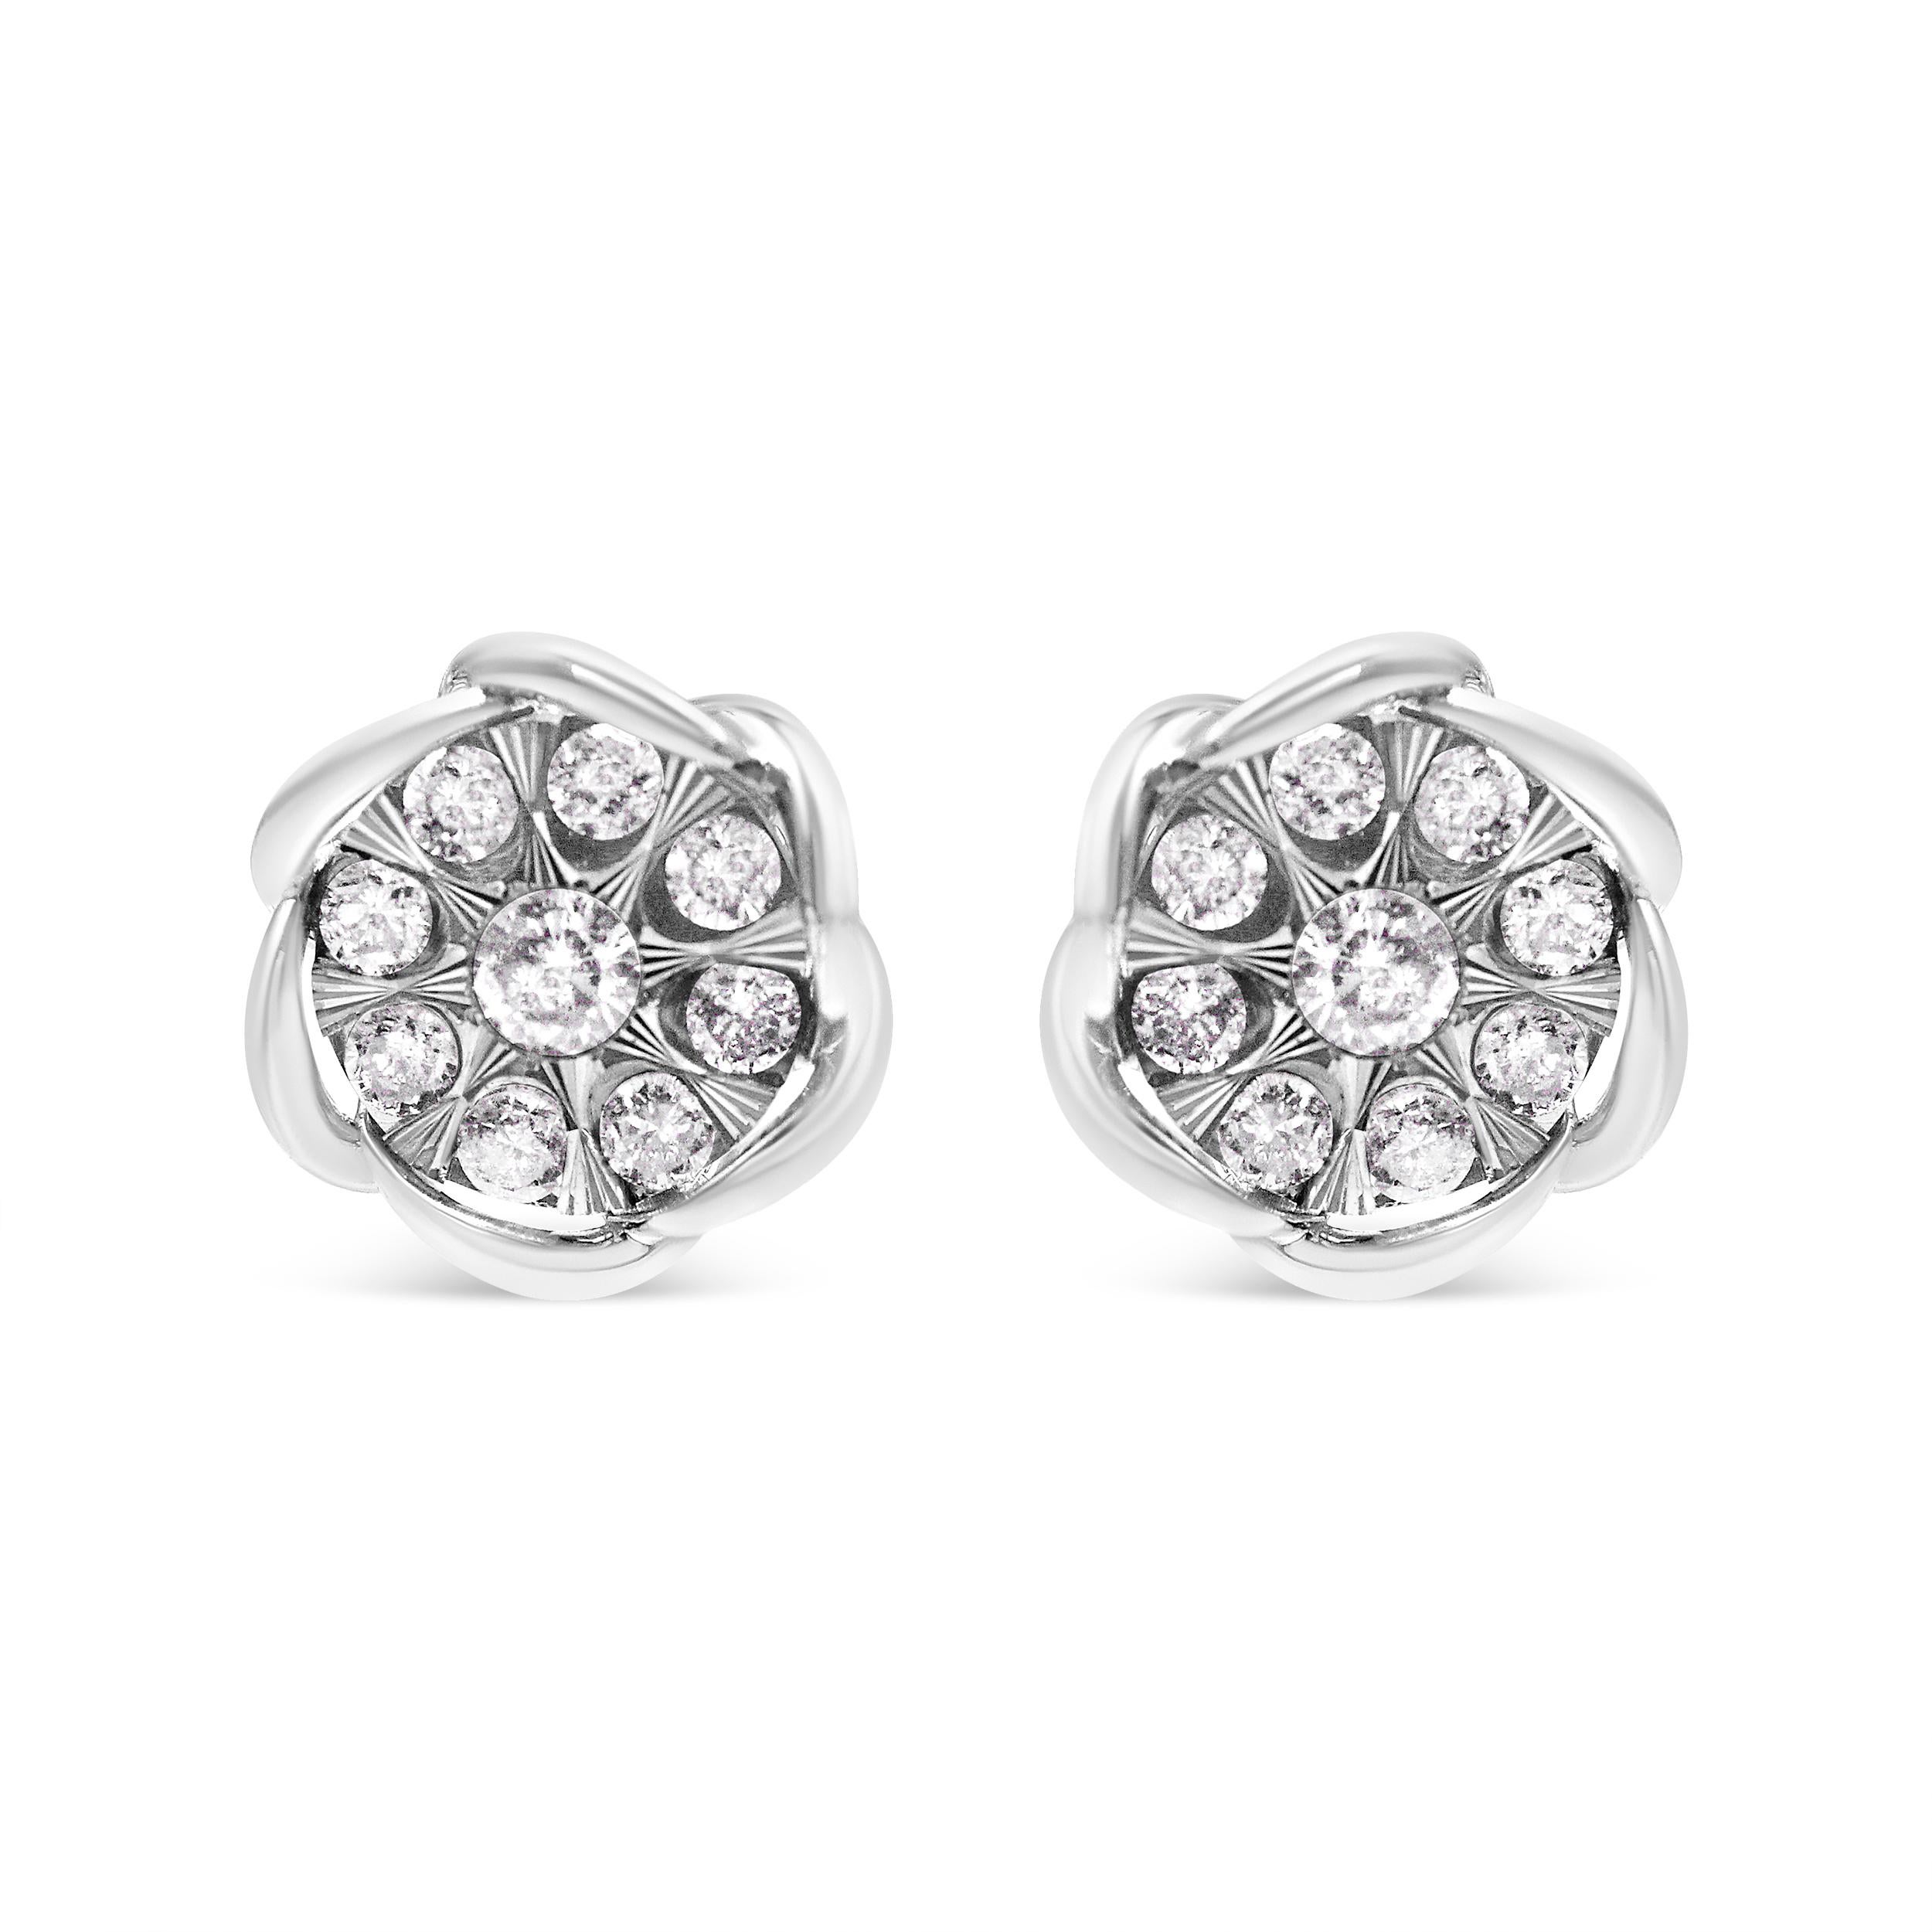 Elevate your everyday look with these modern floral 1/2 c.t. diamond studs. These earrings are each set with 9 round-cut diamonds in a spaced-out, floral design. The central stone is larger than the stones flanking it, and the flower design is